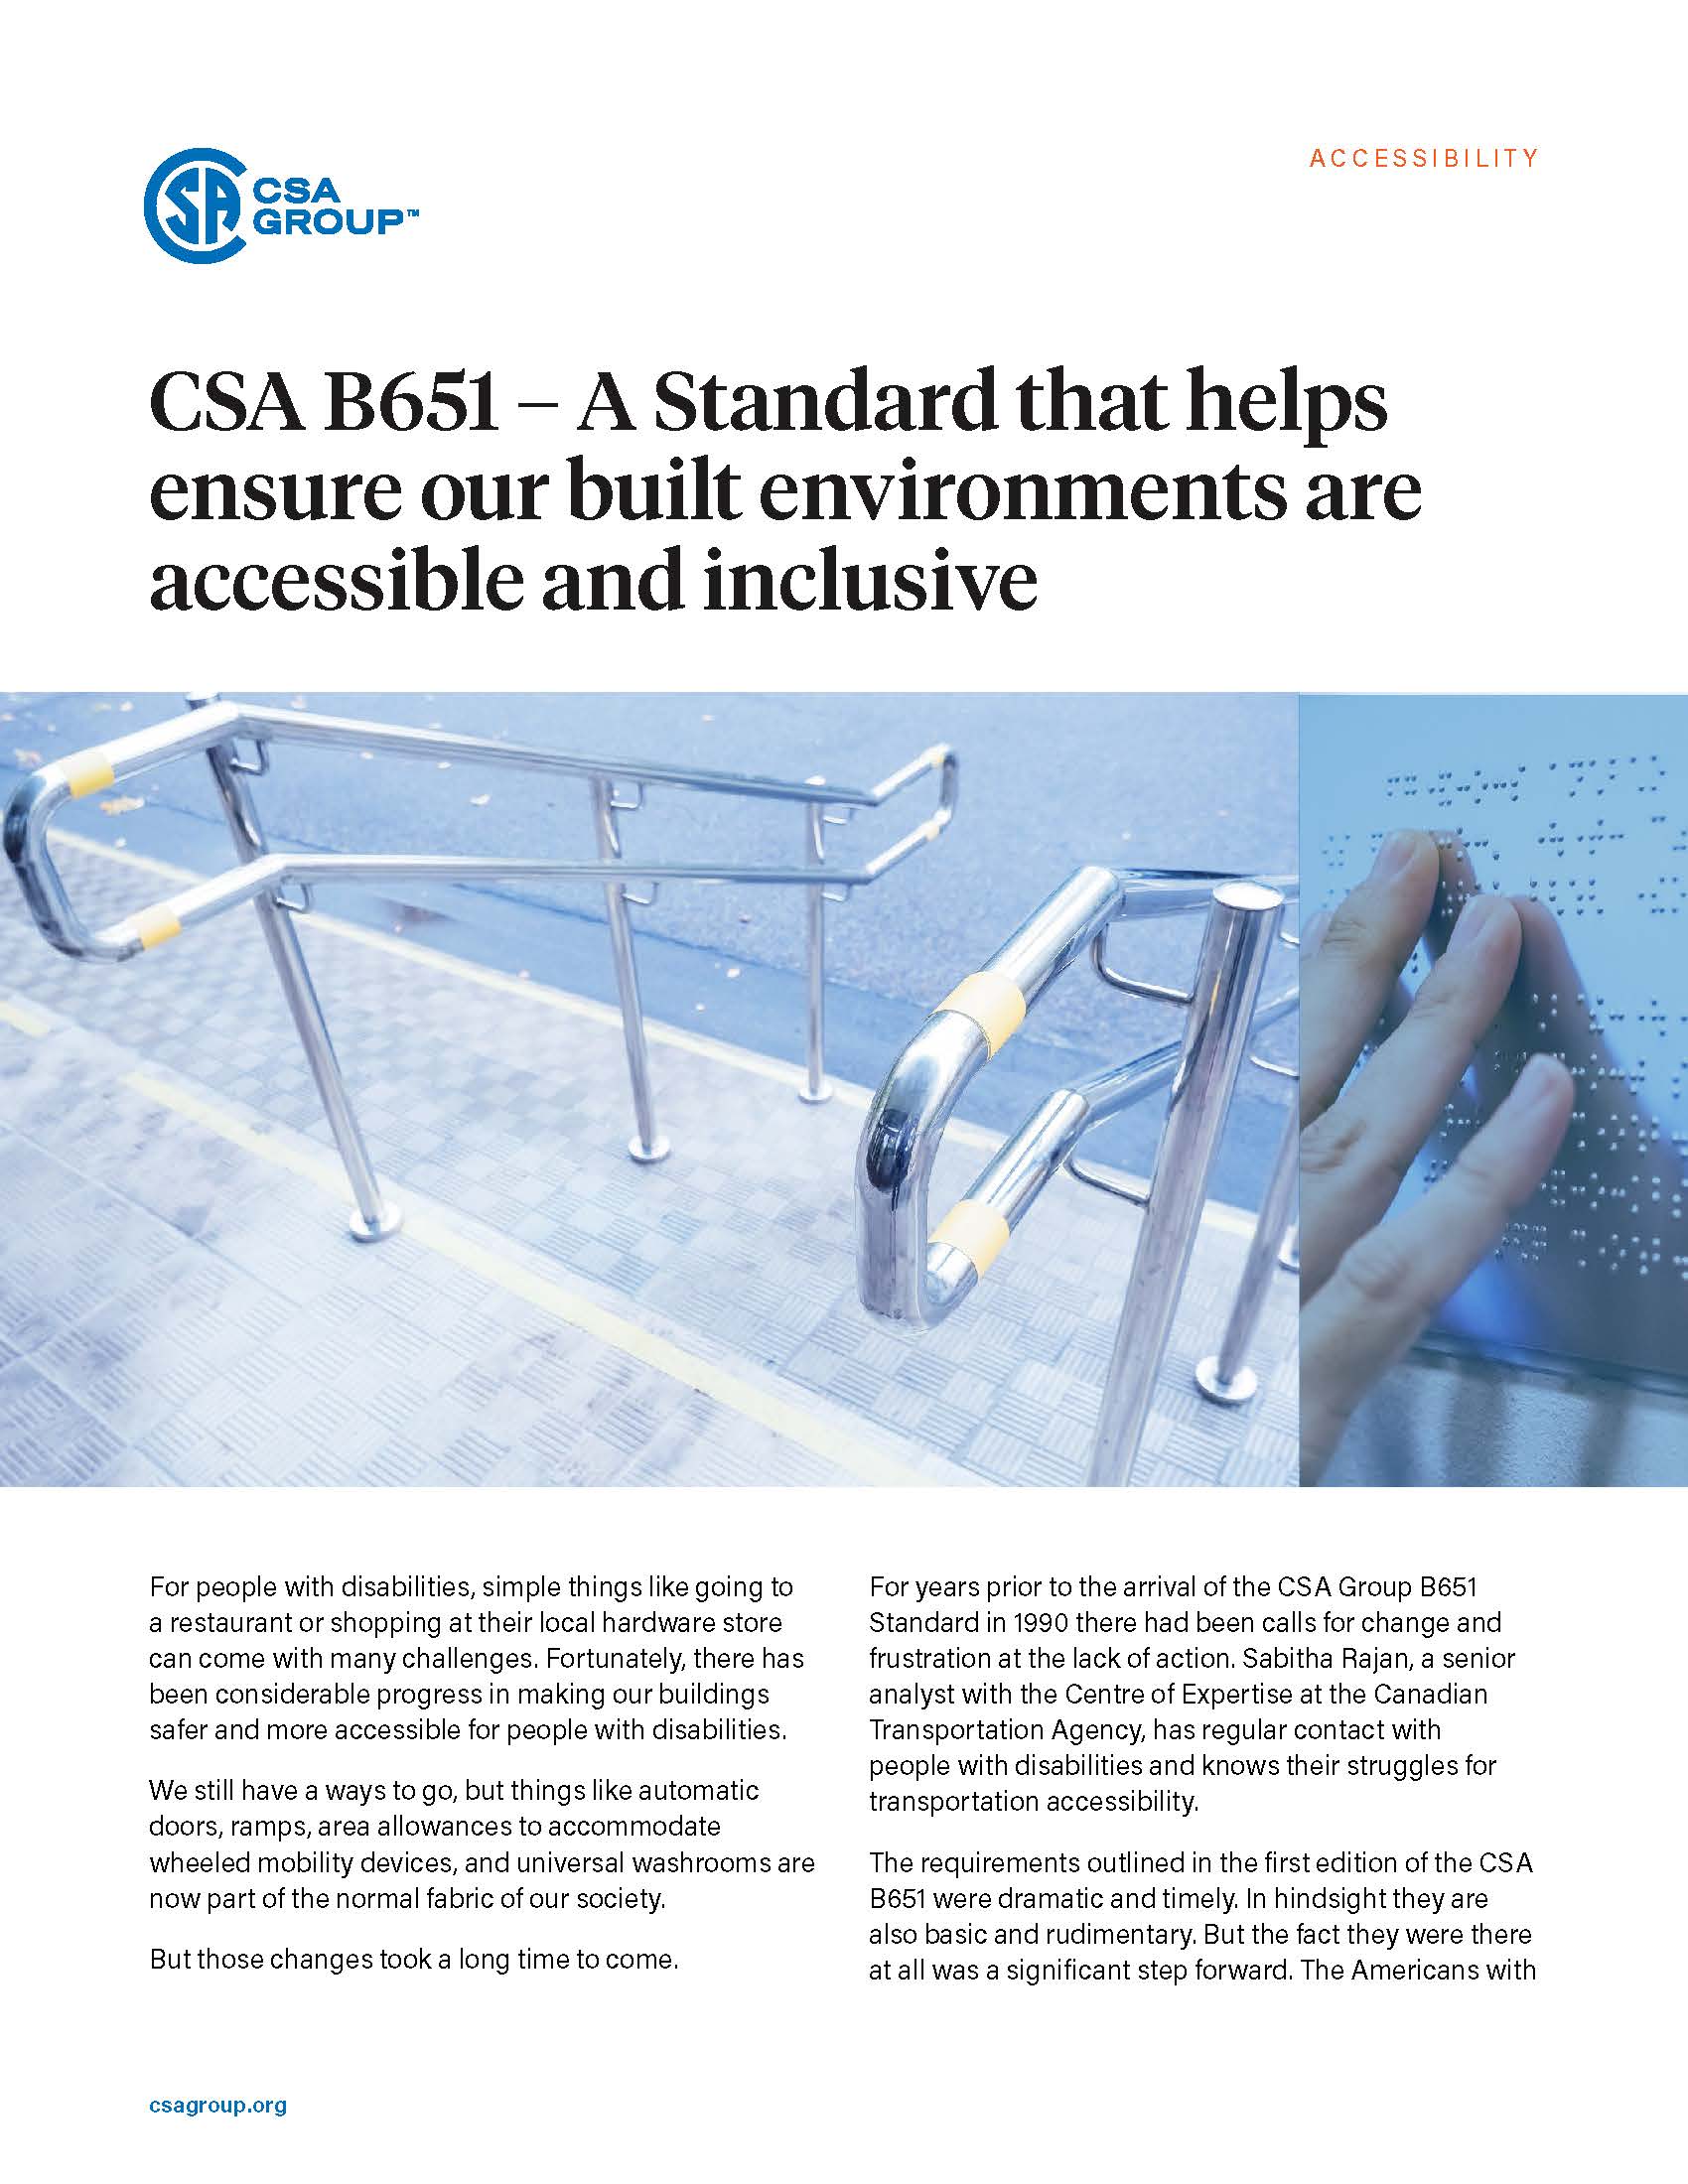 Featured Image. CSA B651: A Standard that helps ensure our built environments are accessible and inclusive